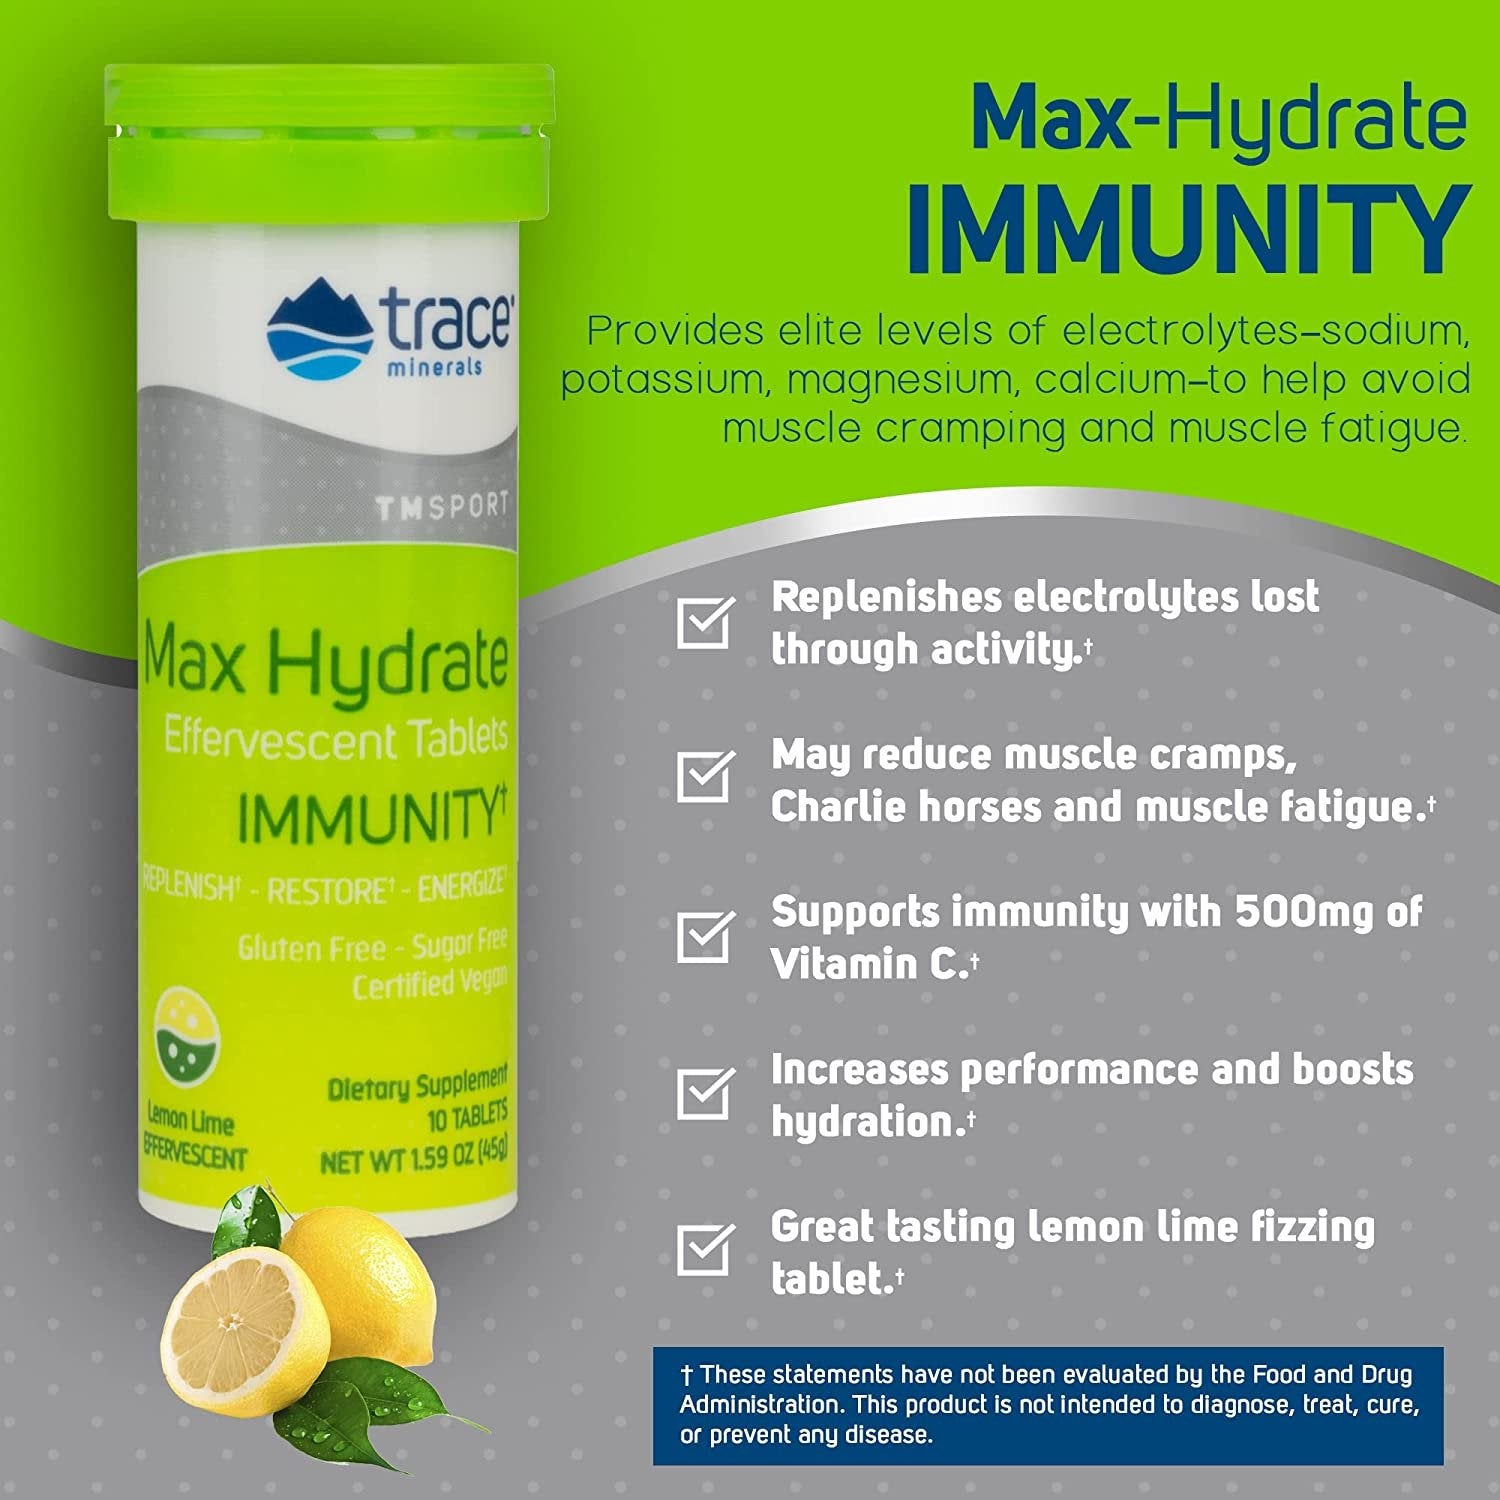 Trace Minerals | MAX Hydrate Immunity | High Performance Electrolyte Fizzing, Immune Support | Magnesium, Sodium, Potassium, Vitamin C Non GMO | Lemon Lime | 8 Tubes of 10 Tablets